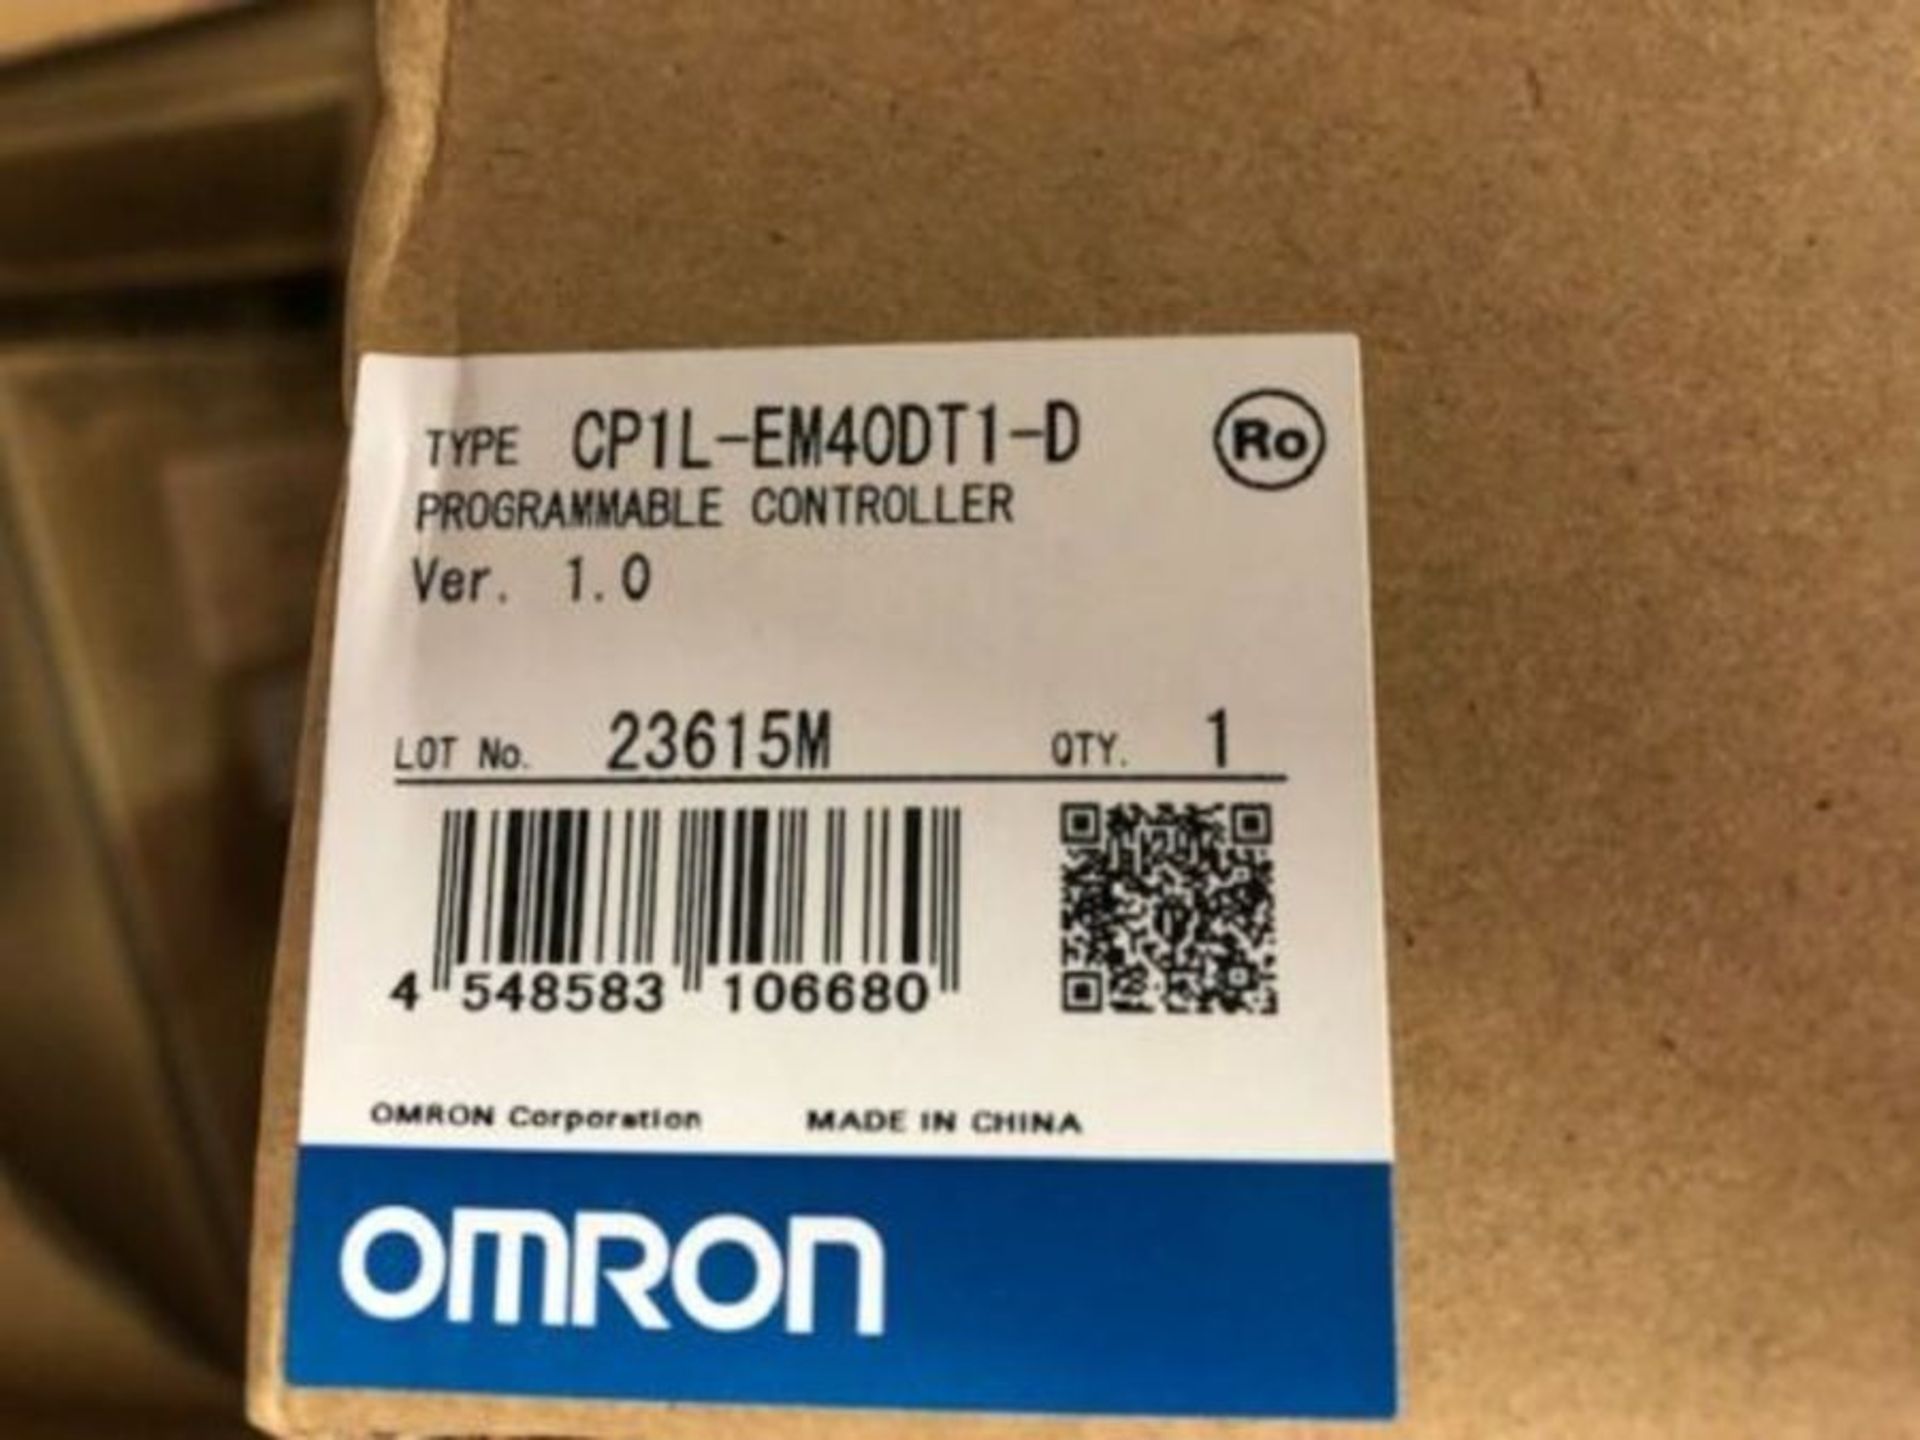 Omron CP1L-EM PLC CPU, Ethernet Networking Computer Interface - A6 3008184213 - Image 3 of 3